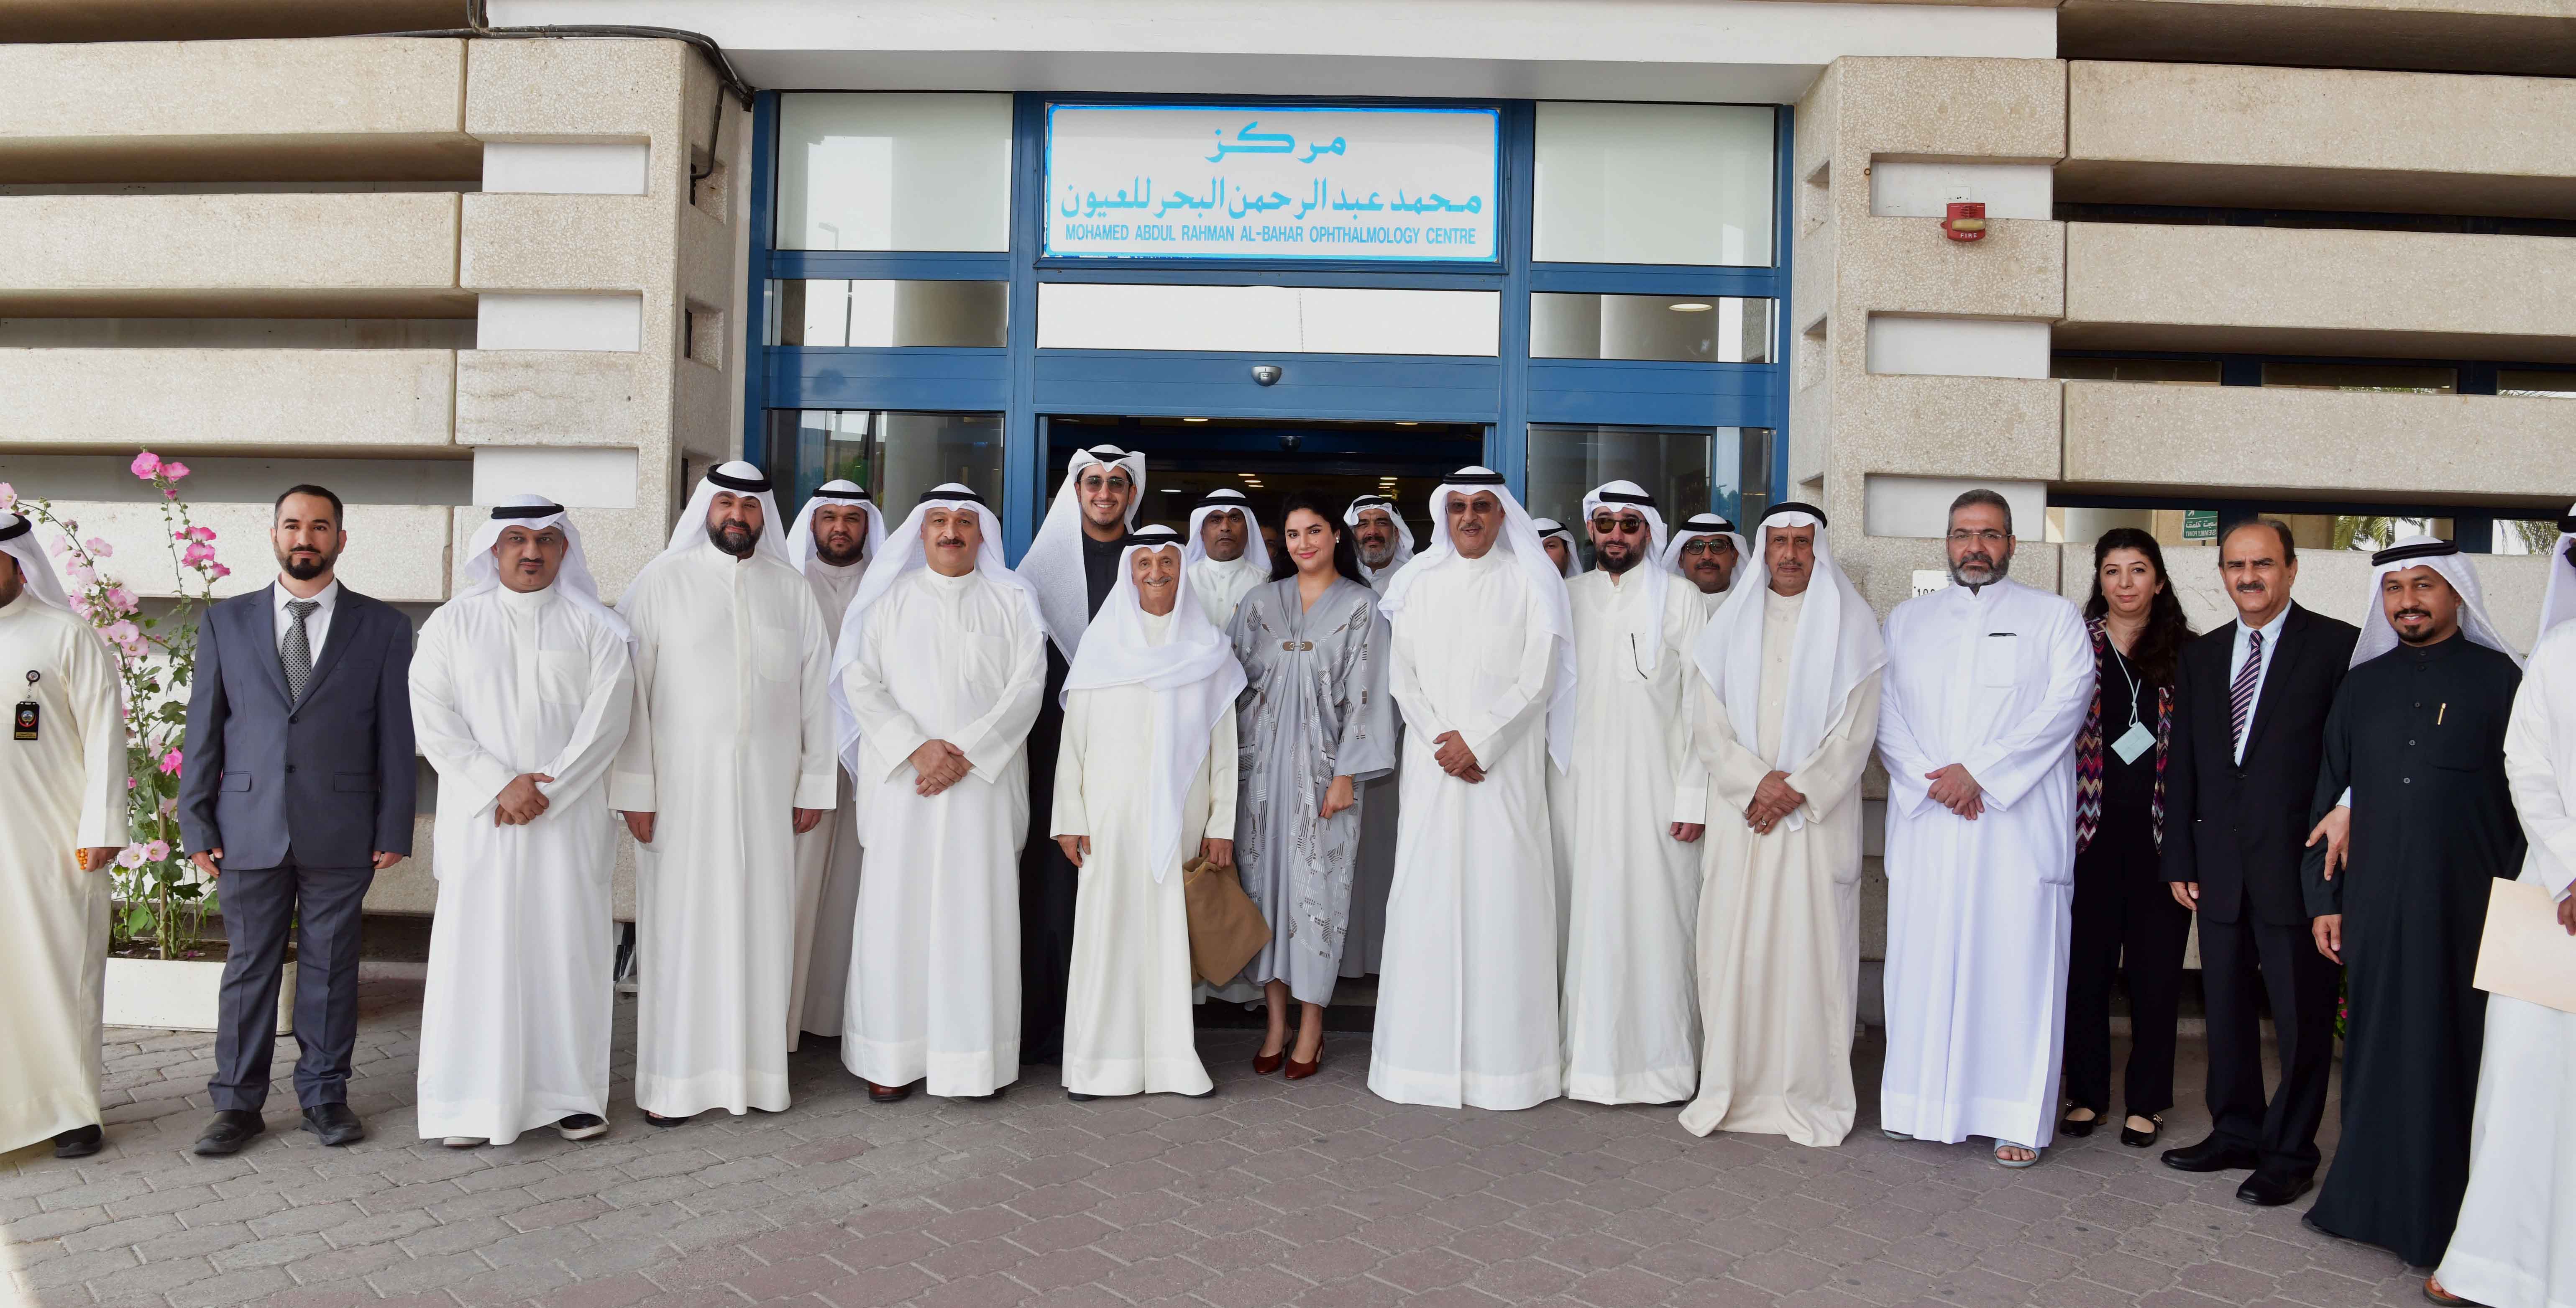 The Minister of Health with number of ministry leaders and representatives of the Al-Bahar family